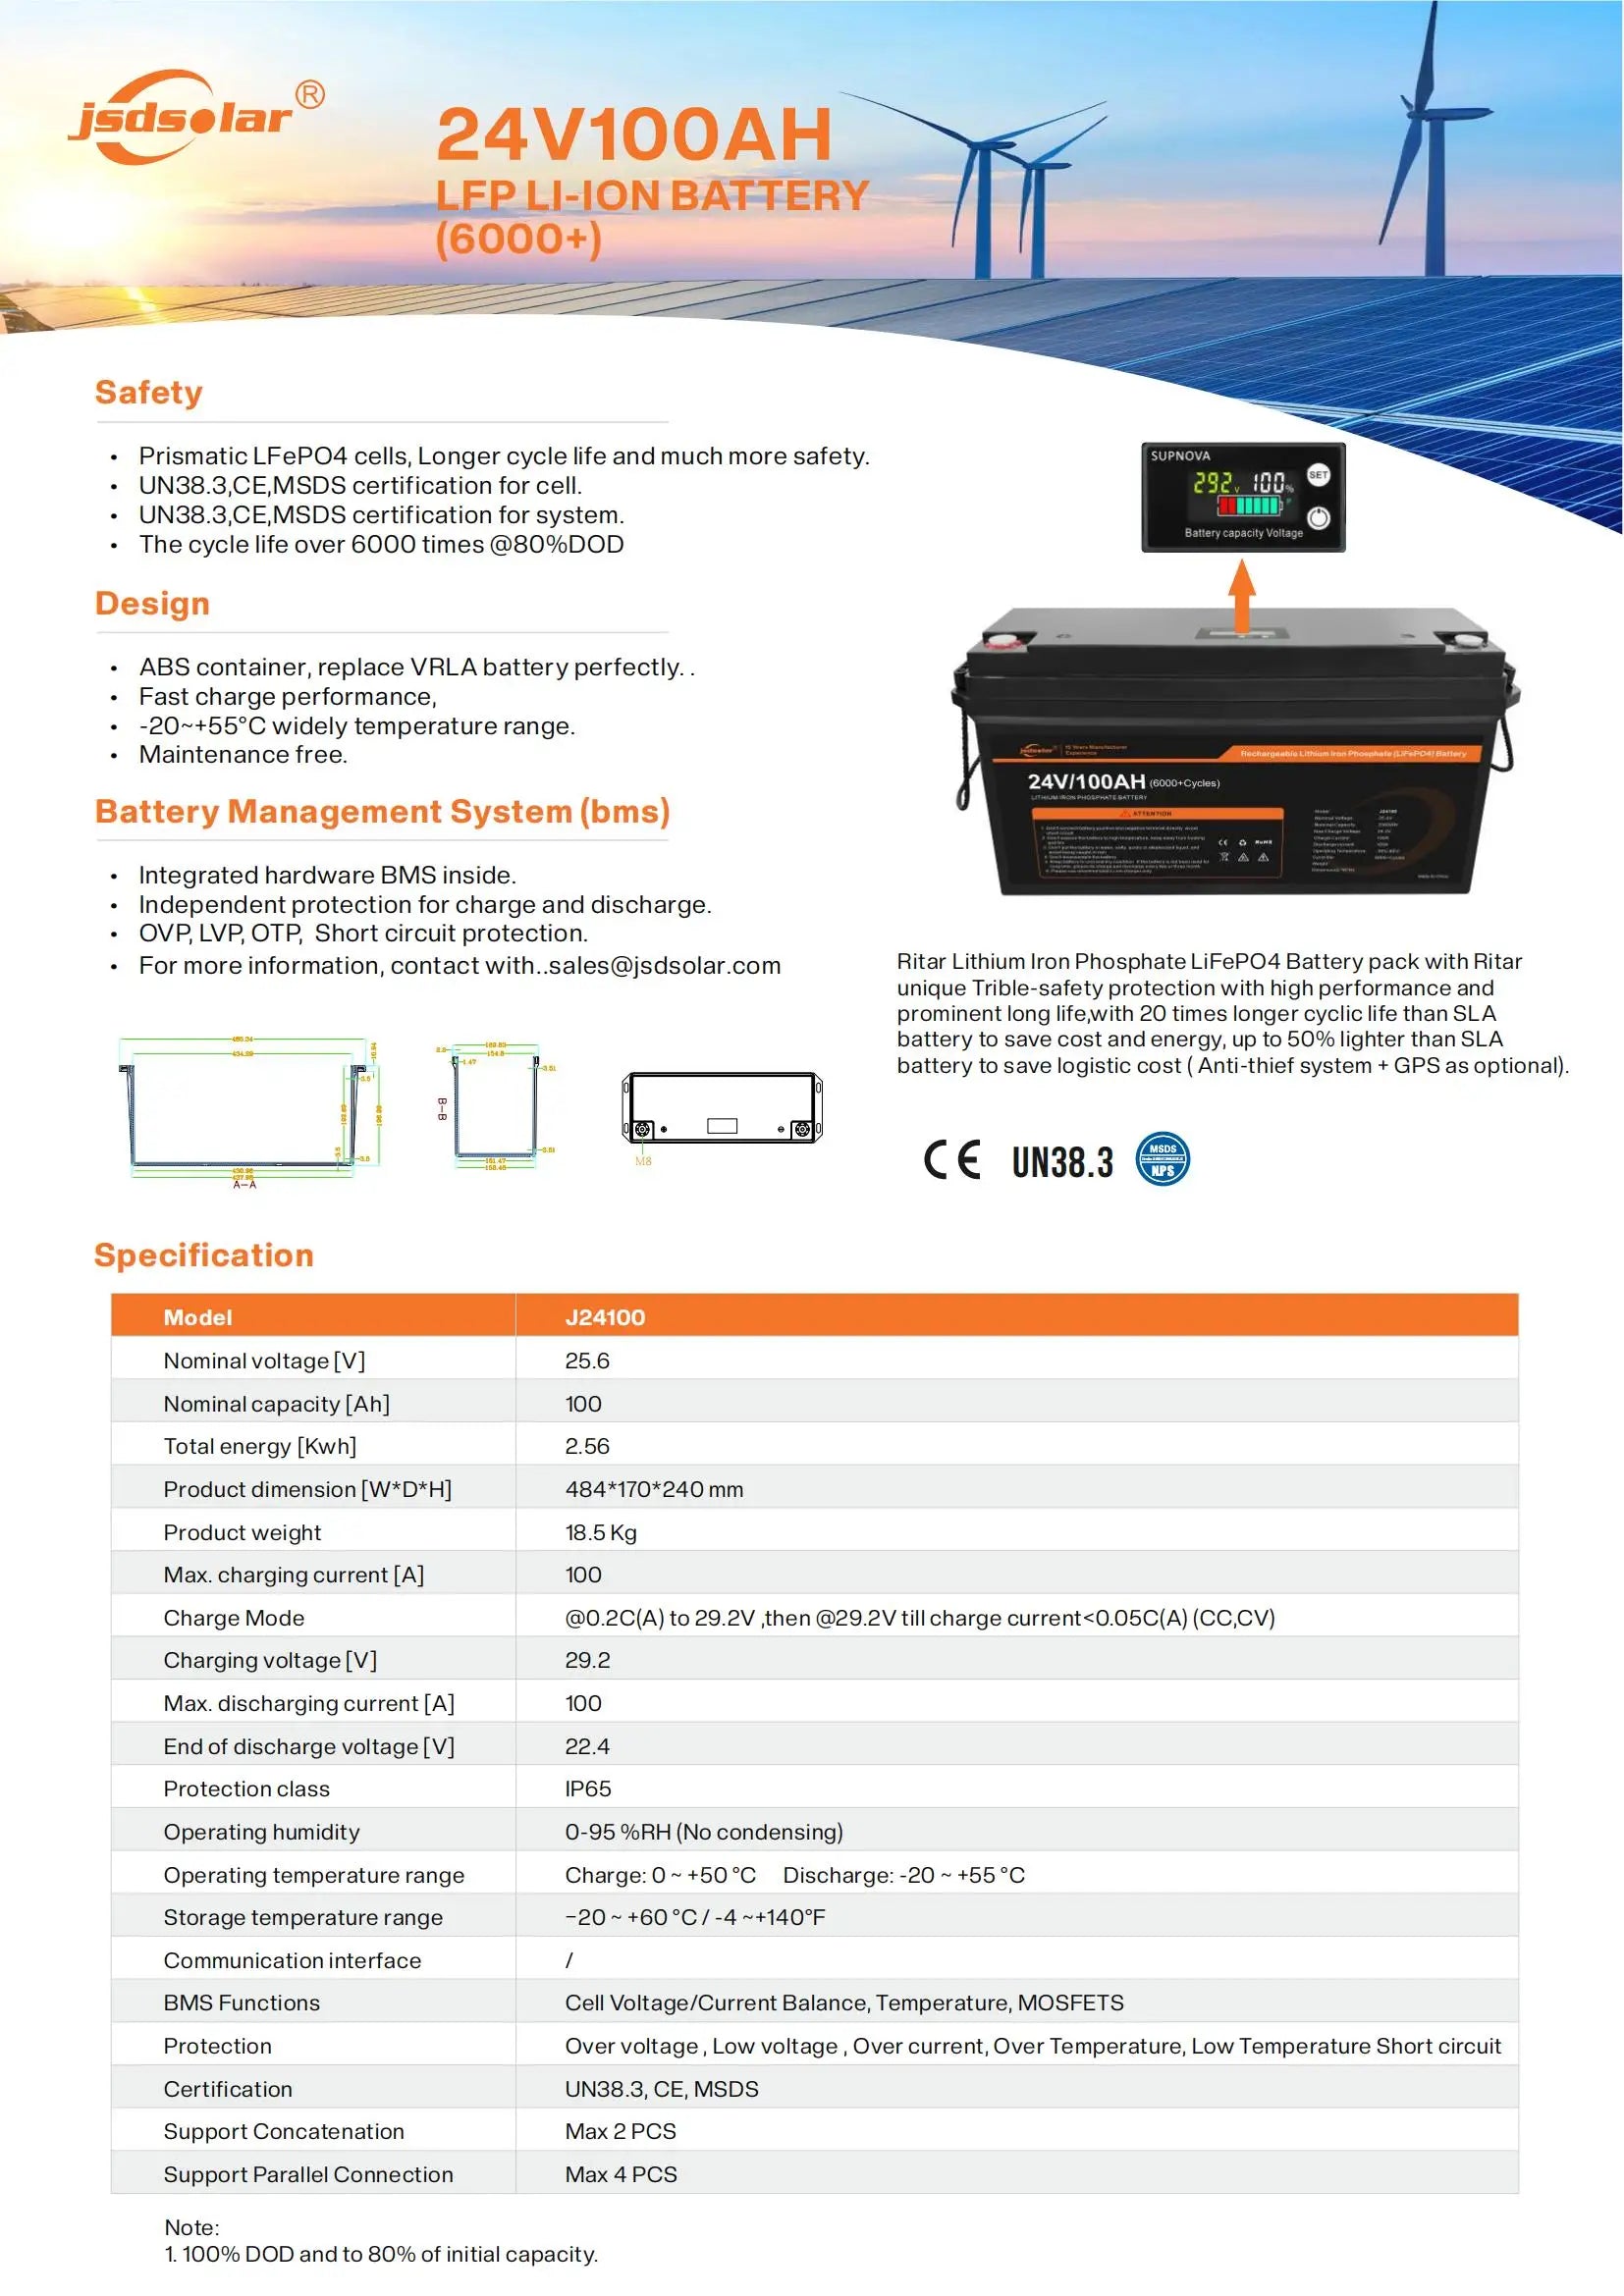 LiFePO4 solar boat battery with built-in BMS, available in 100Ah and 200Ah capacities, suitable for various solar boat applications.